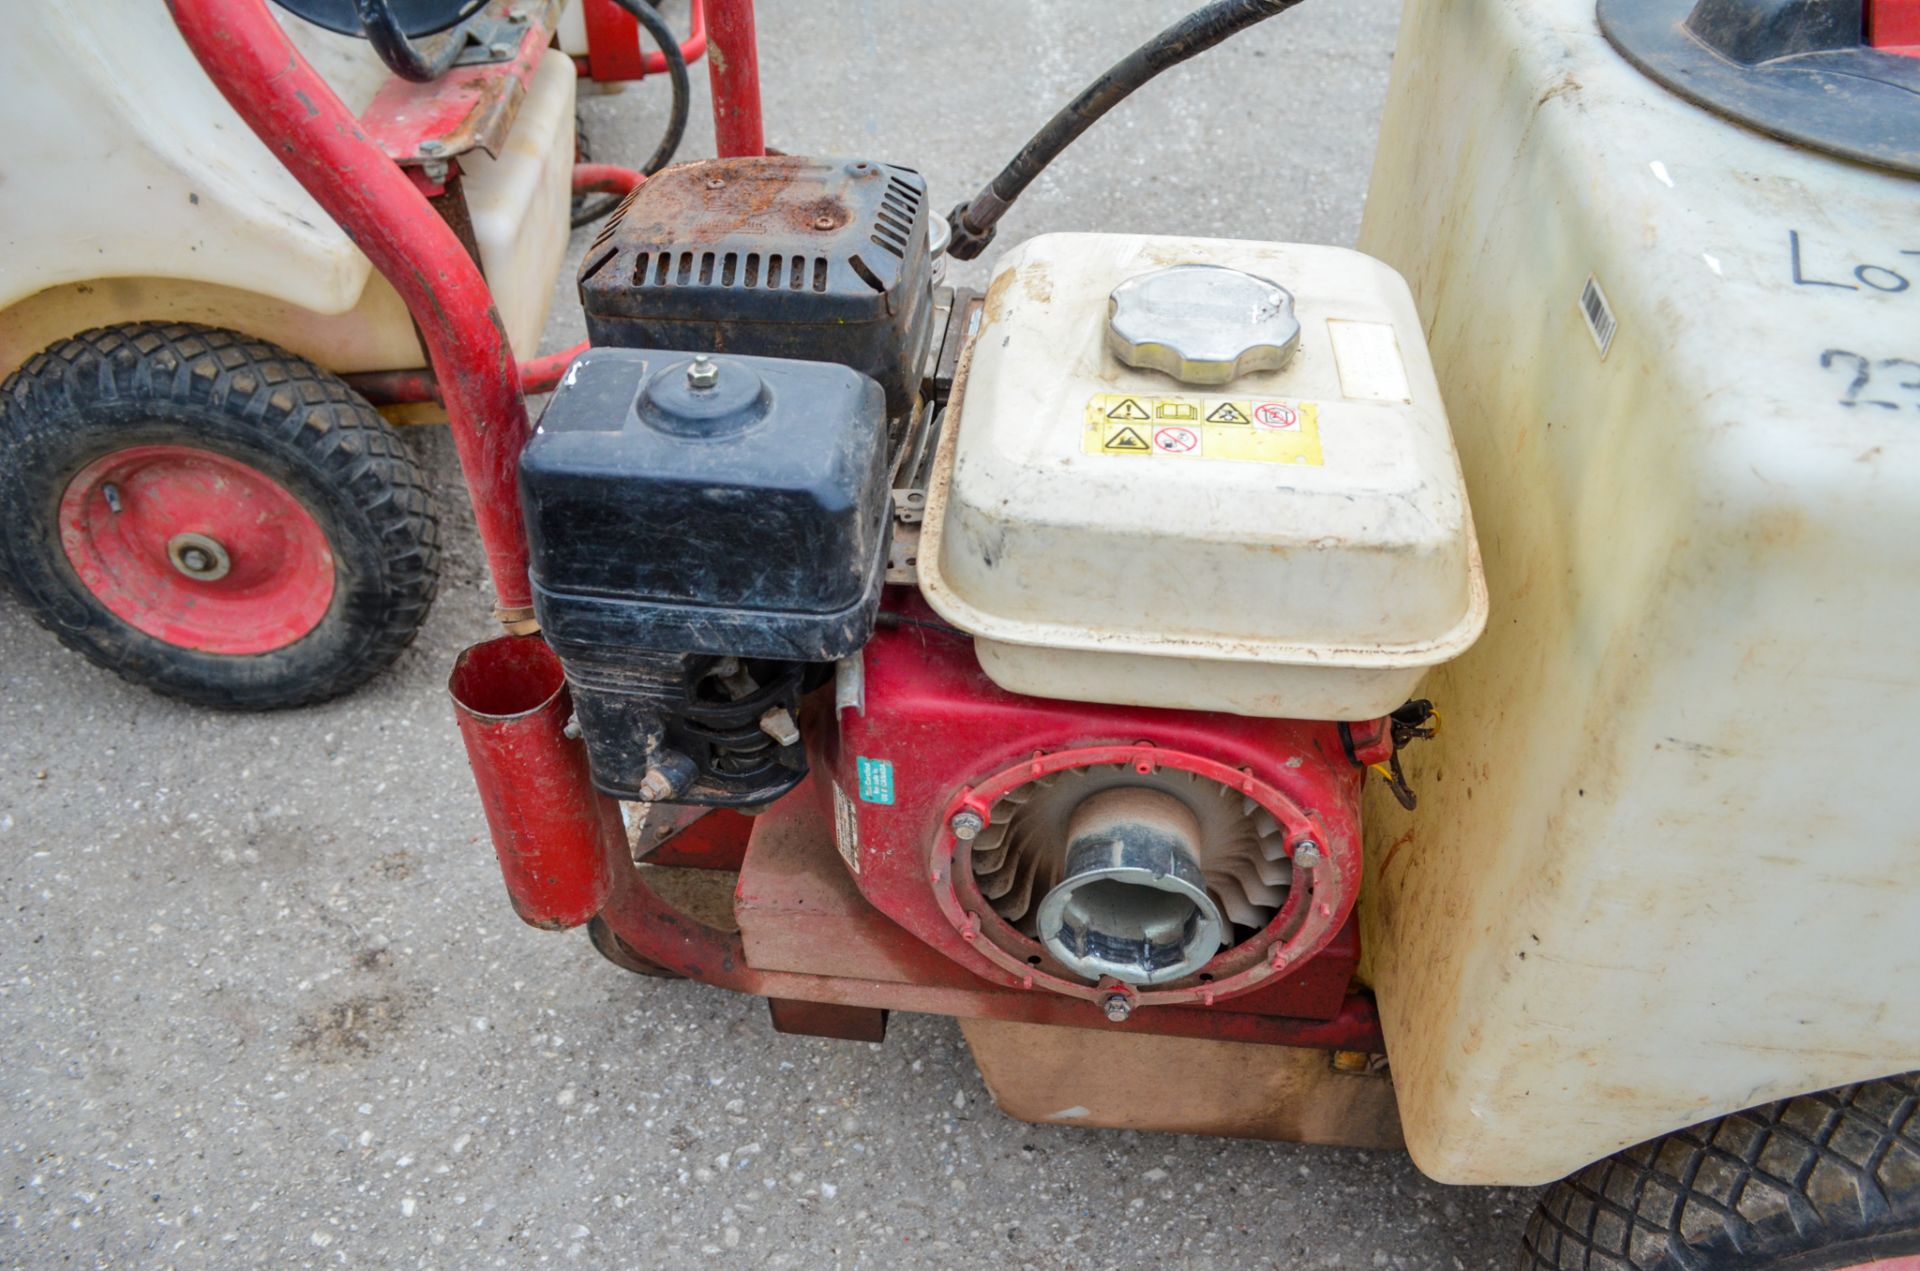 Petrol driven pressure washer ** Pull cord assembly missing ** 2377-0112 - Image 2 of 2